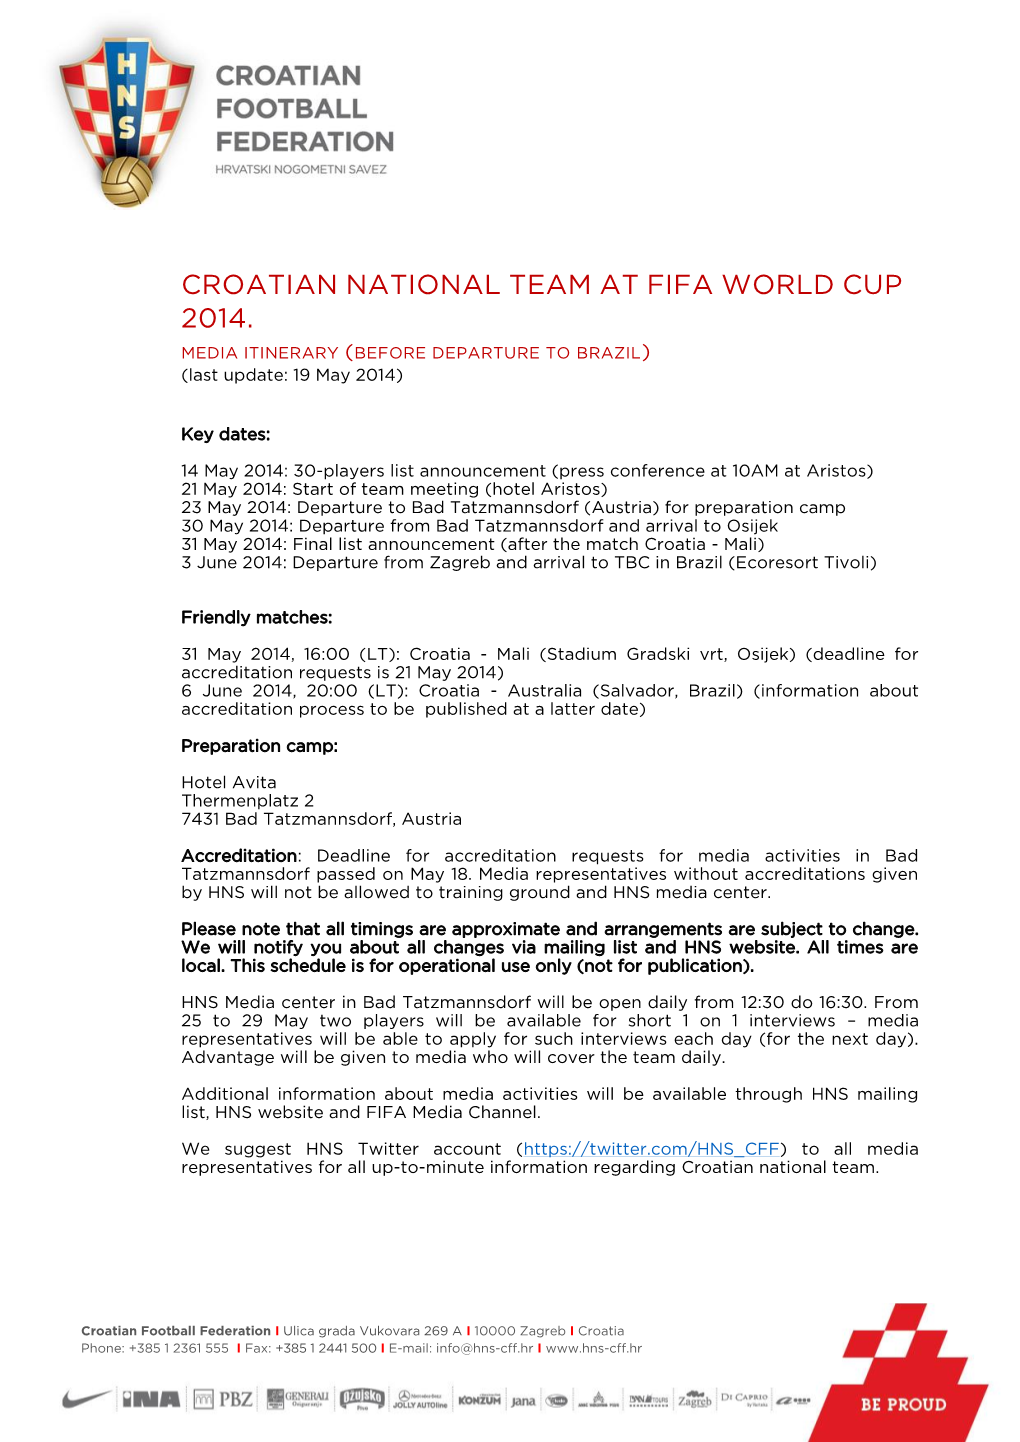 CROATIAN NATIONAL TEAM at FIFA WORLD CUP 2014. MEDIA ITINERARY (BEFORE DEPARTURE to BRAZIL) (Last Update: 19 May 2014)